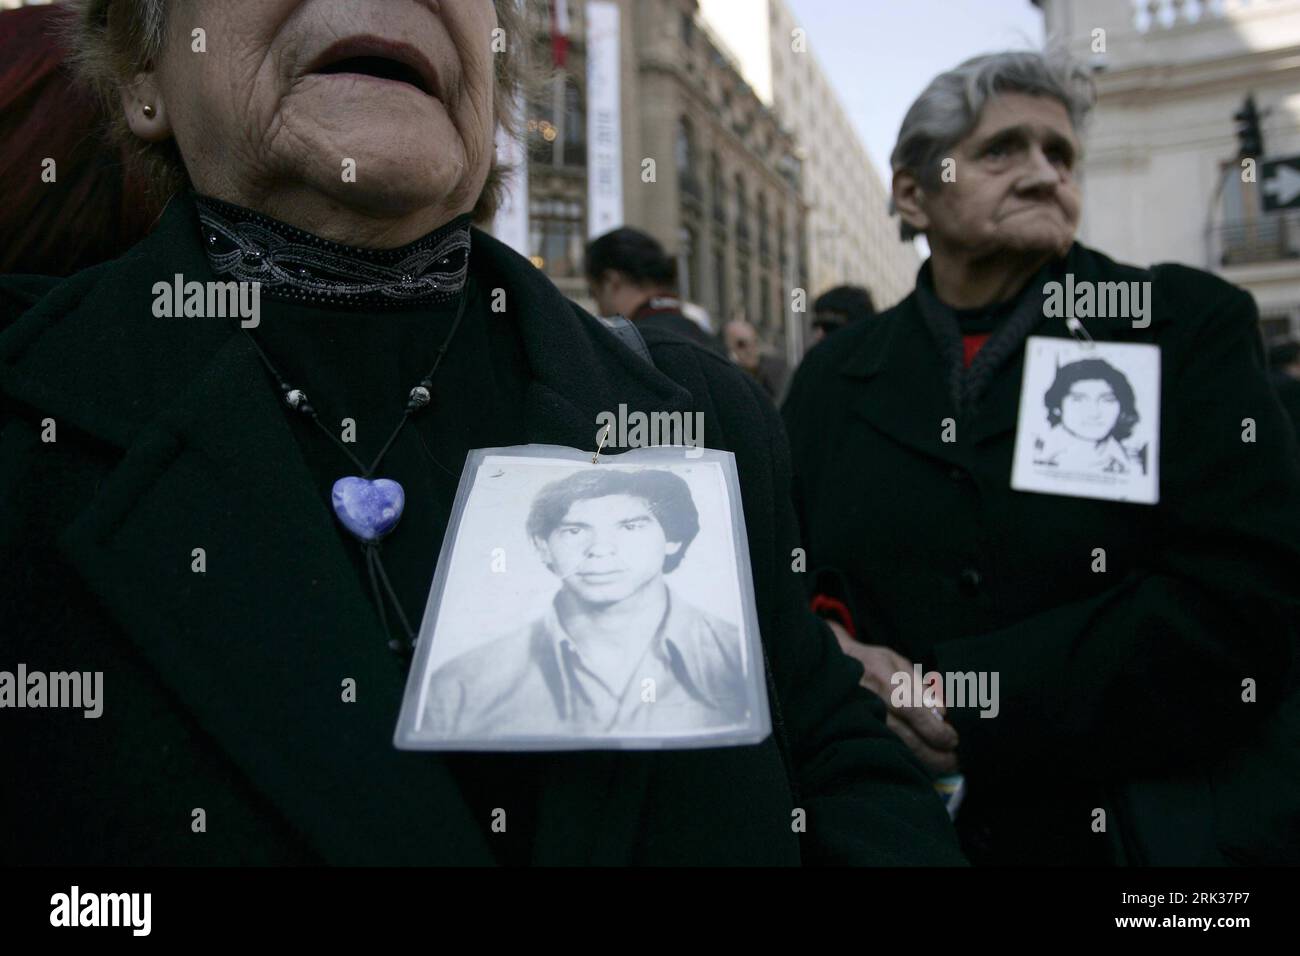 Bildnummer: 53348538  Datum: 12.09.2009  Copyright: imago/Xinhua (090912) -- SANTIAGO, Sept. 12, 2009 (Xinhua) -- Relatives of arrested and missing by the dictatorship of Augusto Pinochet carry pictures of their relatives, during a rally marking the 36th anniversary of the coup that ousted president Salvador Allende and brought General Augusto Pinochet to power, in Santiago, capital of Chile, Sept. 11, 2009. (Xinhua/Danny Alveal Aravena)(axy) (3)CHILE-SANTIAGO-COUP-ANNIVERSARY PUBLICATIONxNOTxINxCHN kbdig xkg 2009 quer  o0 Gedenken, Angehörige, Opfer, Diktatur, Jahrestag, Staatsstreich    Bild Stock Photo